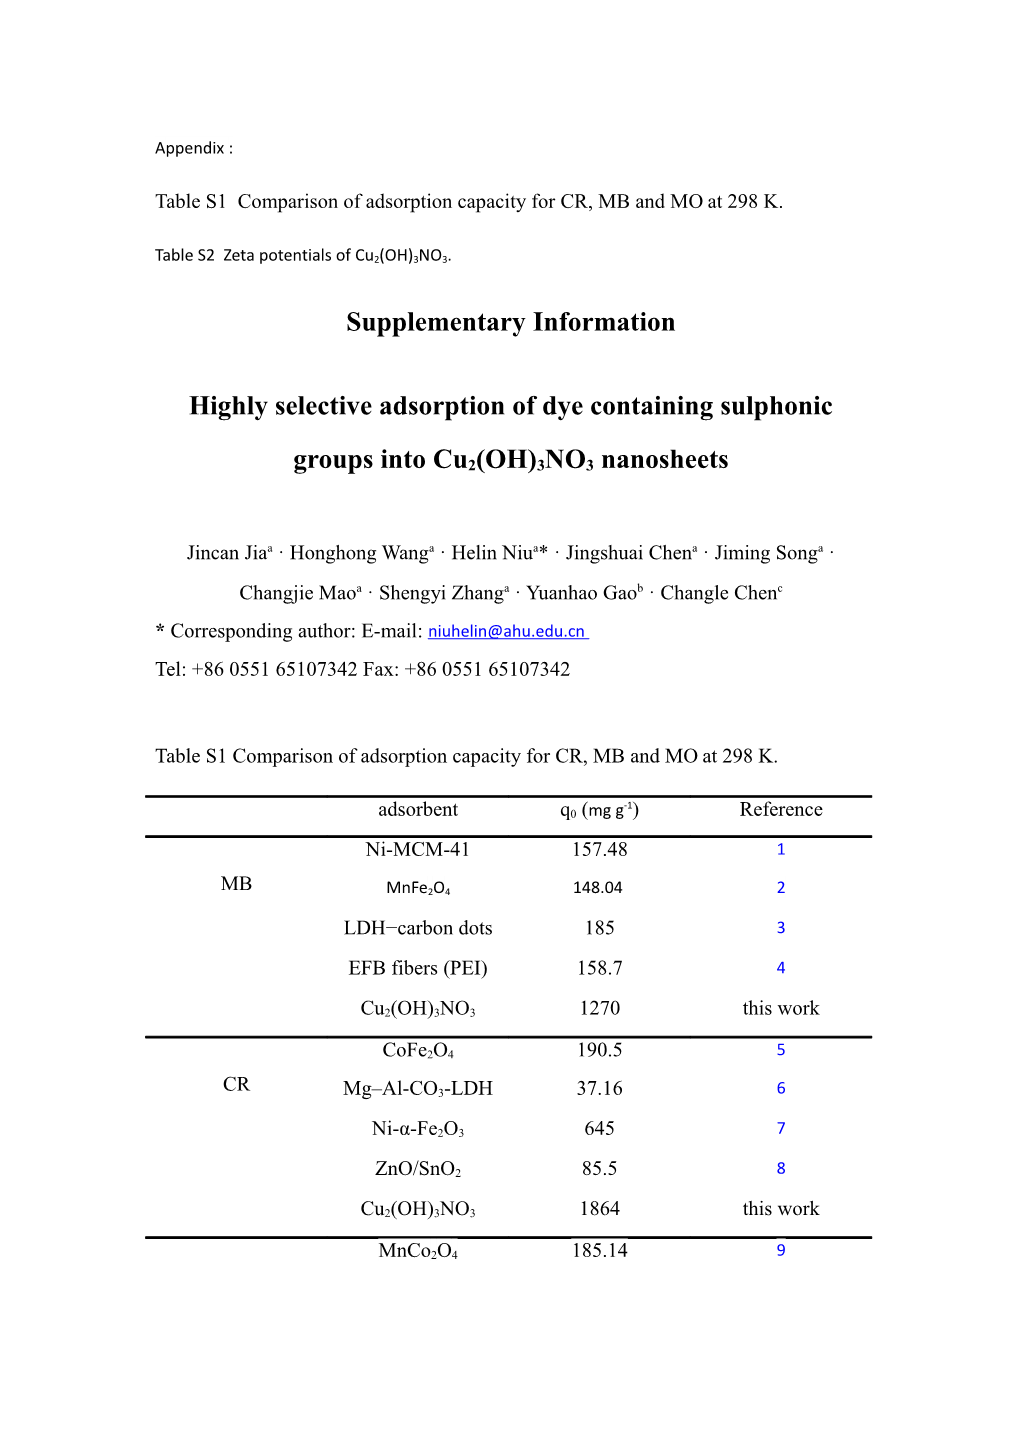 Table S1 Comparison of Adsorption Capacity for CR, MB and Moat 298 K